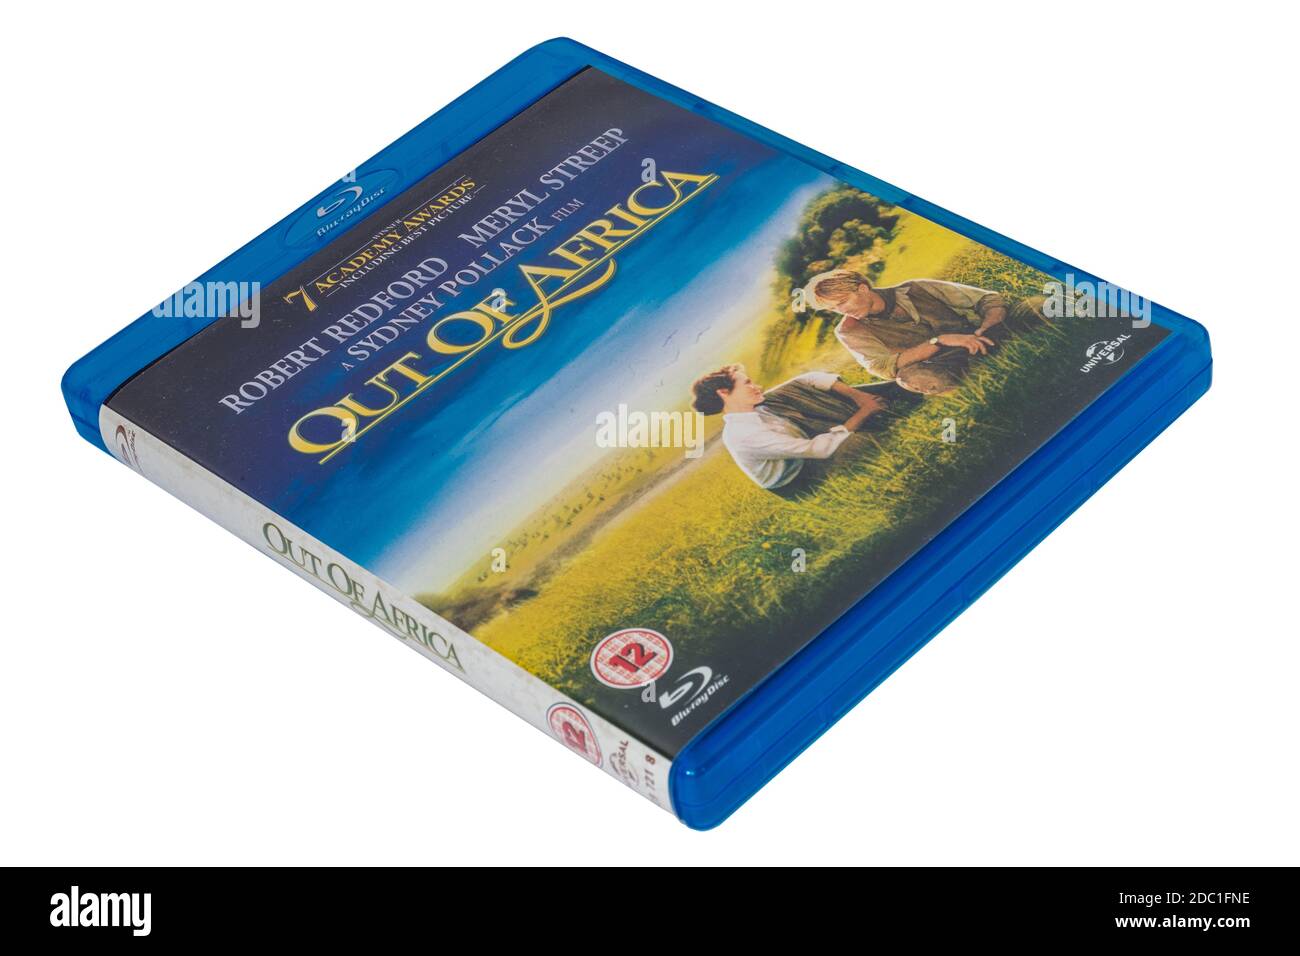 Out of Africa blu ray disc (DVD) Stock Photo